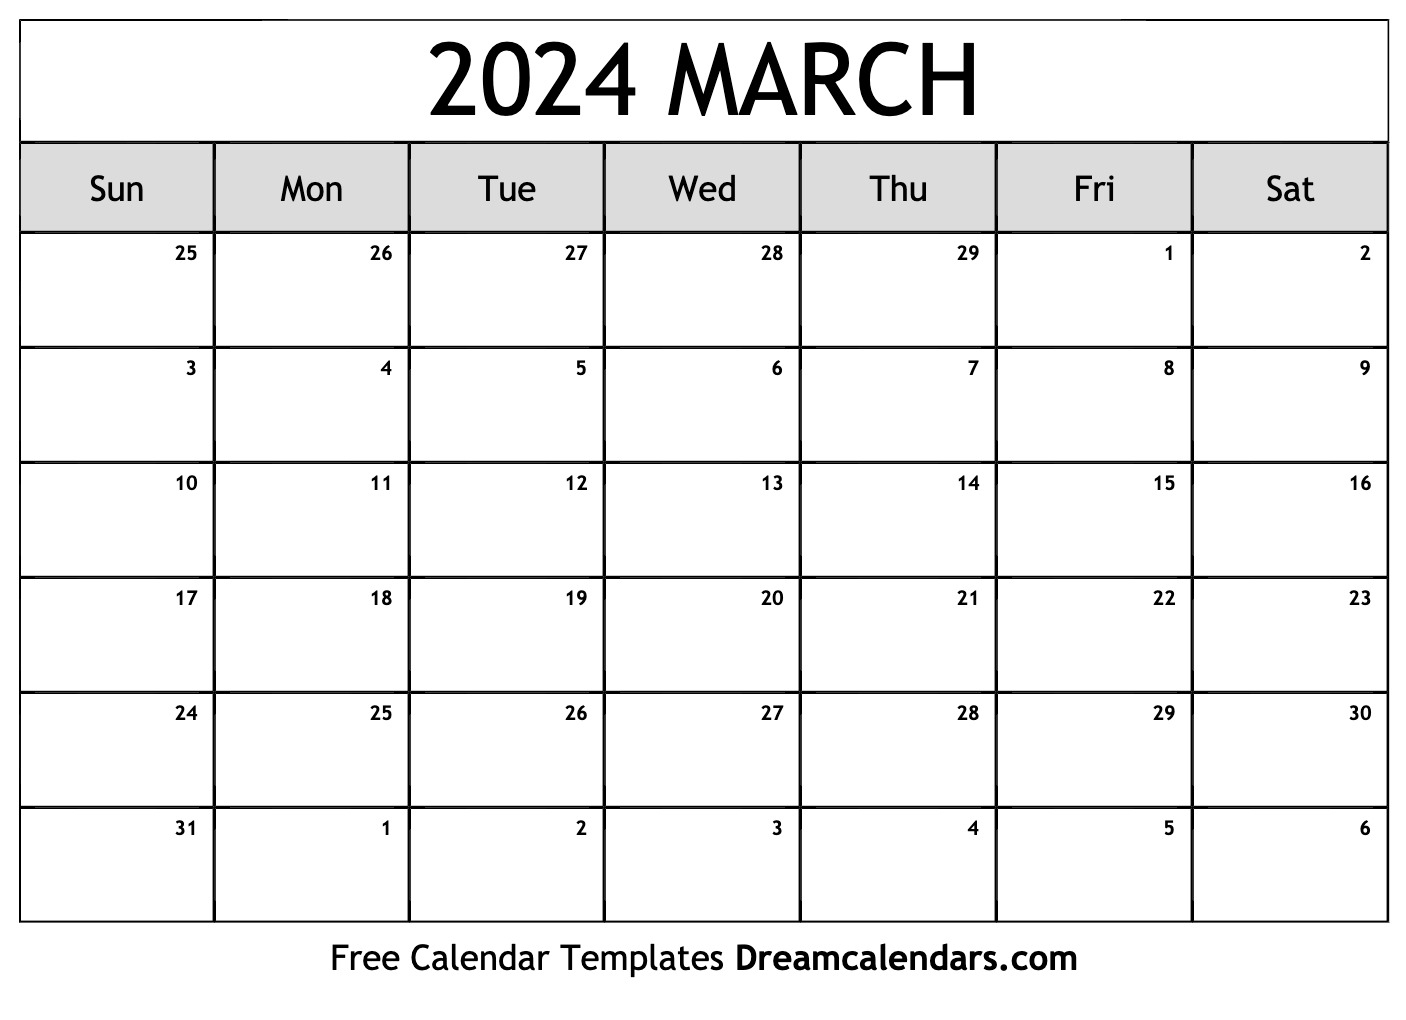 March 2024 Calendar | Free Blank Printable With Holidays for March 2024 Calendar Printable Wiki